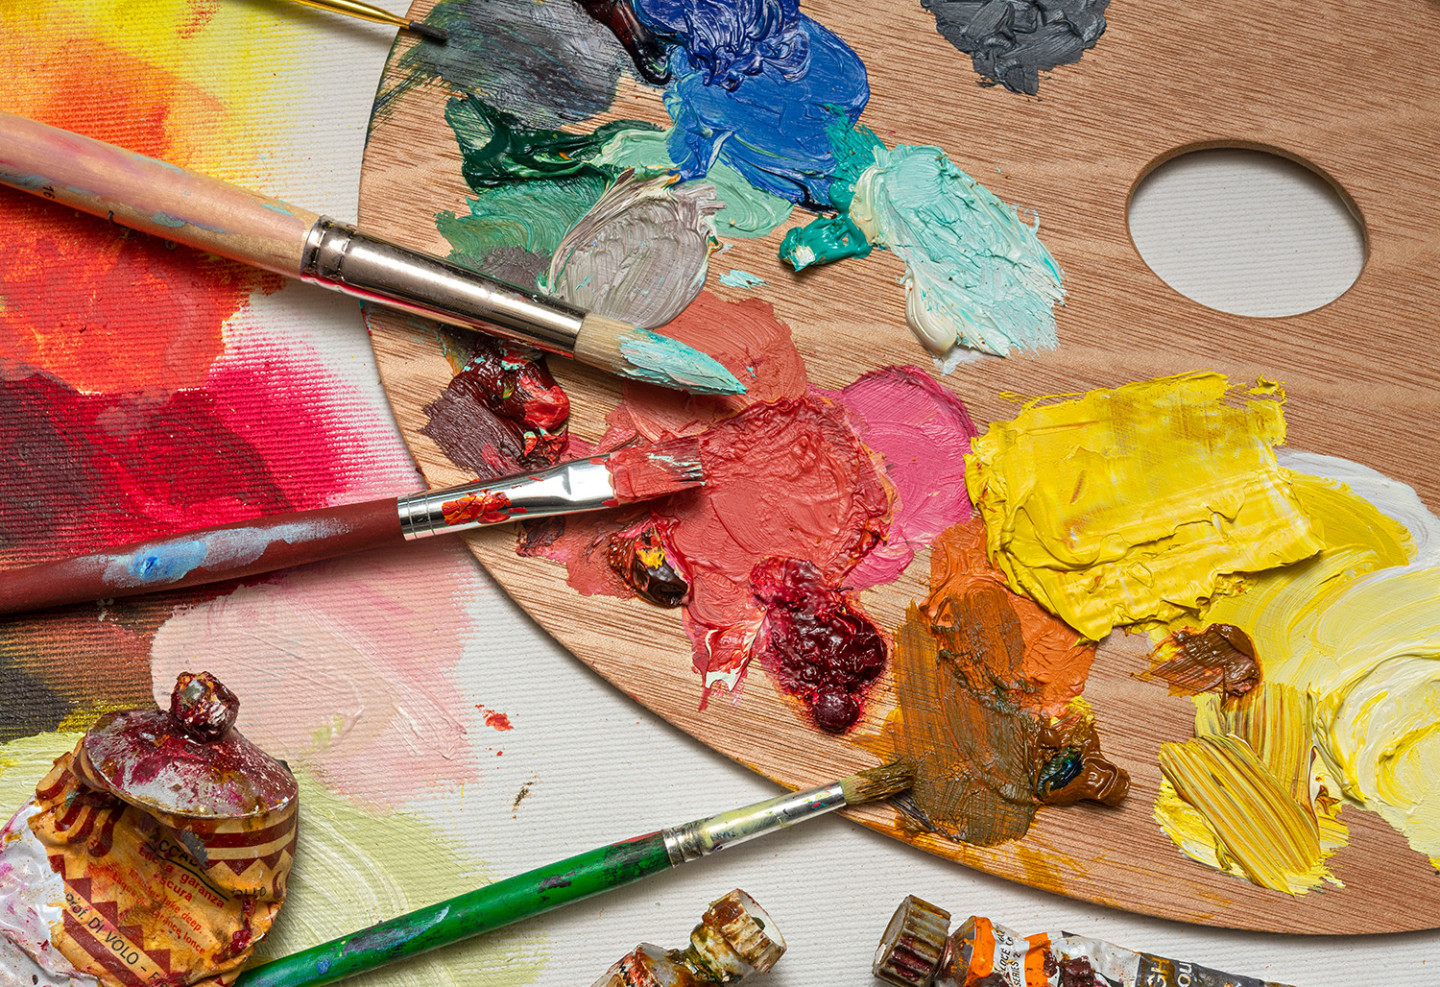  Palette with oil paint in blue, pink and yellow. Brushes that have been used to paint with.